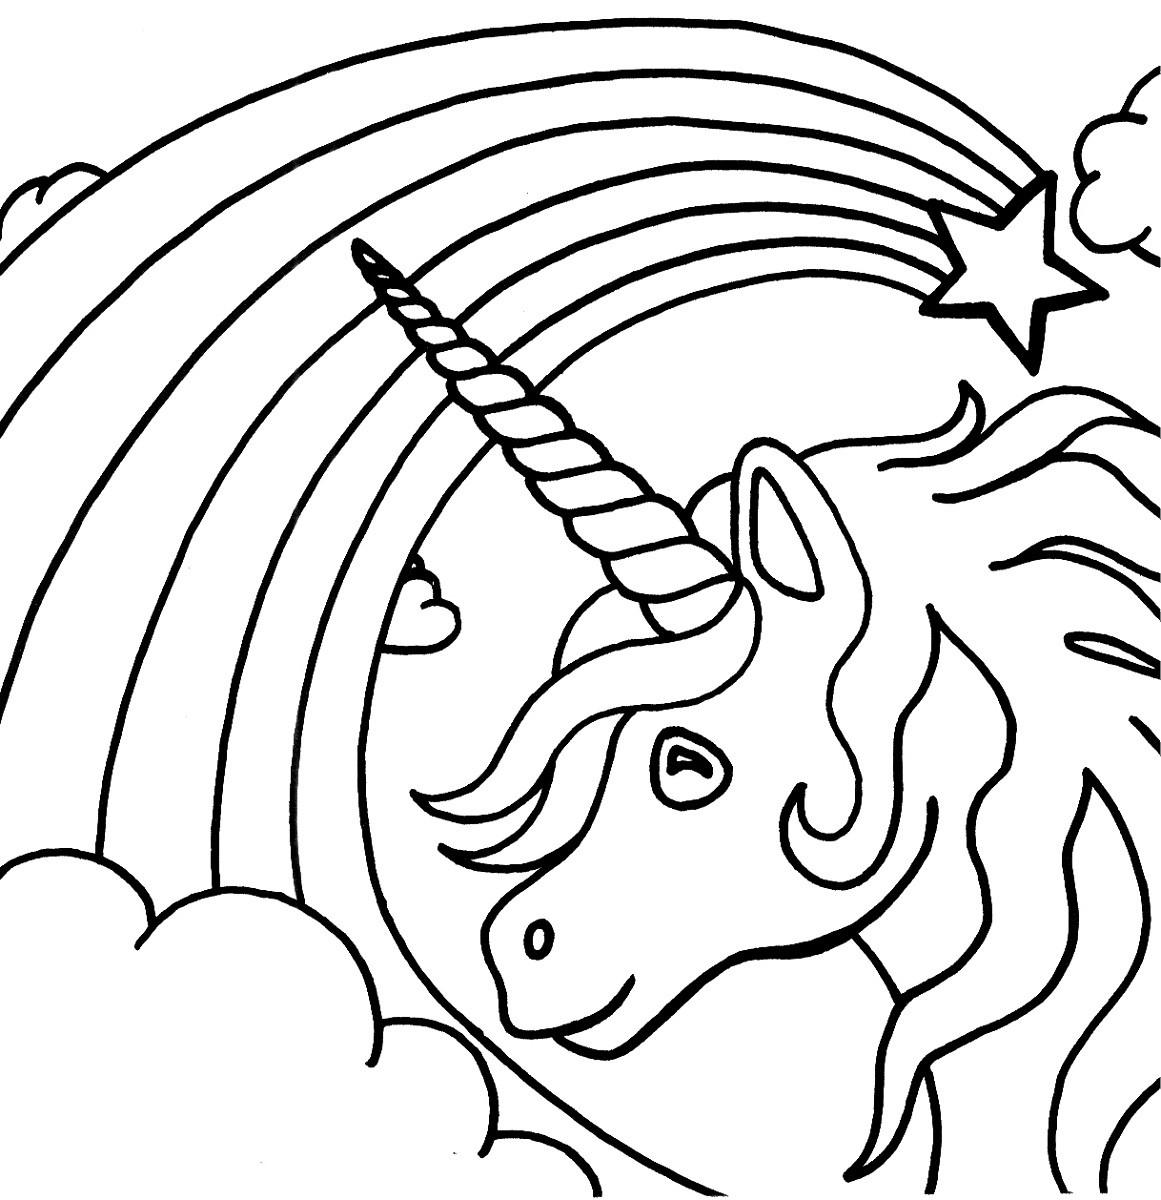 Unicorn Coloring Sheets For Kids
 Unicorn Coloring Pages For Kids at GetDrawings